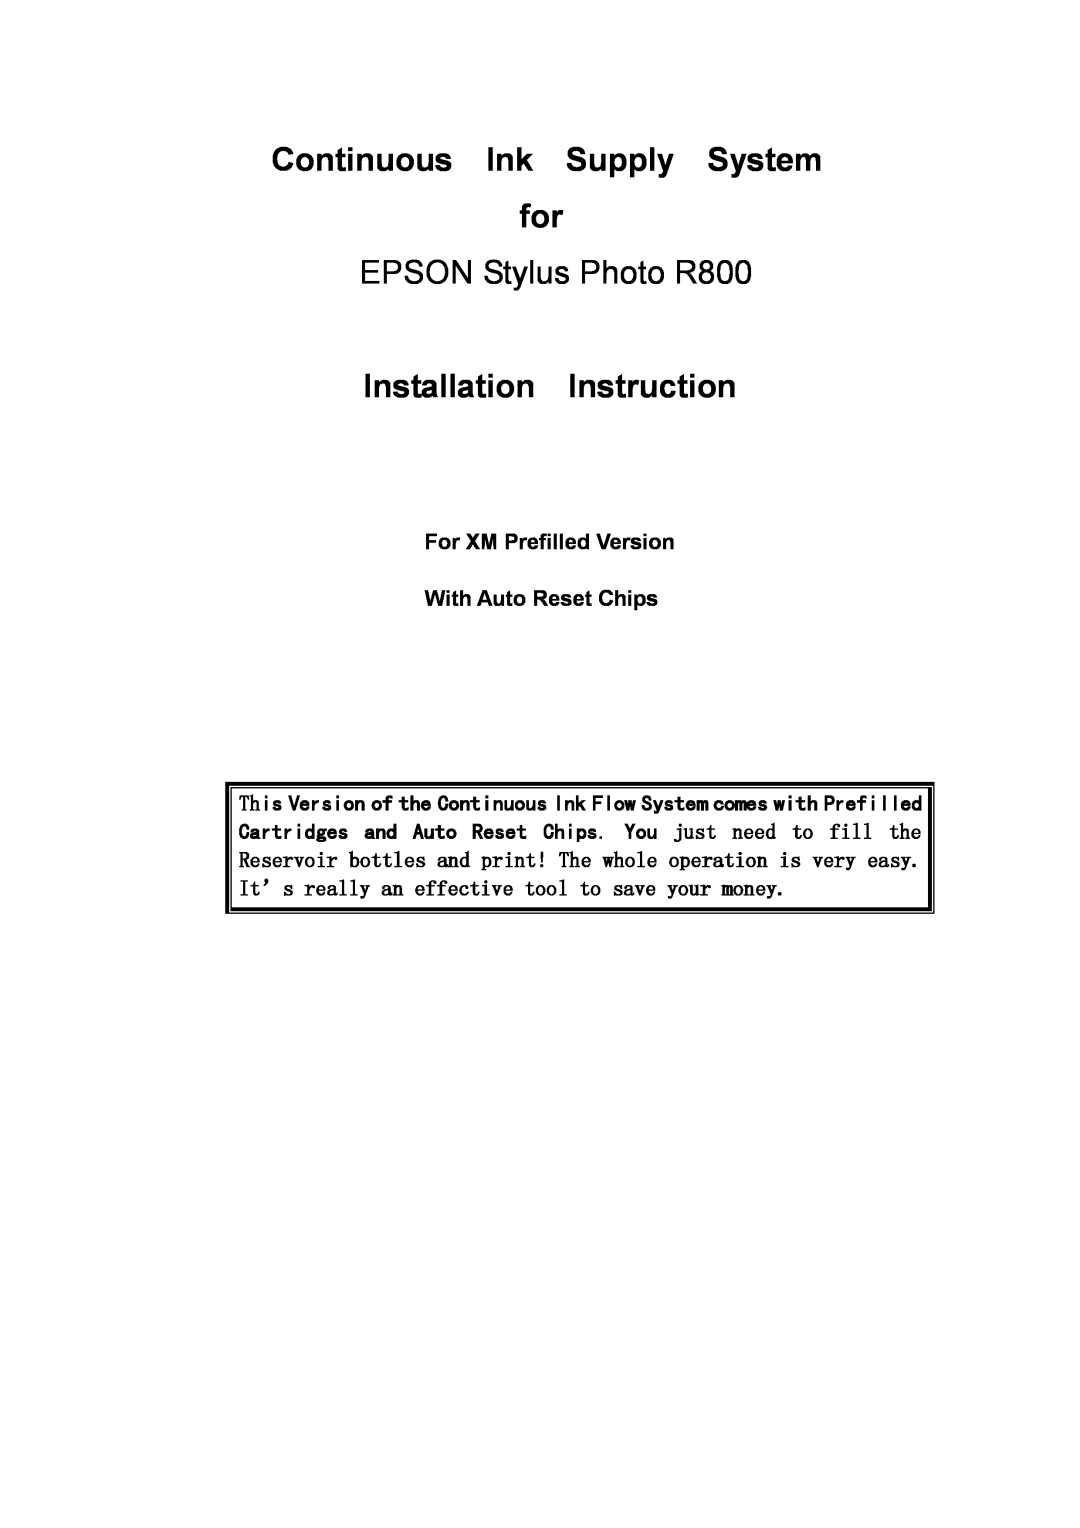 Epson R800 manual For XM Prefilled Version With Auto Reset Chips, Continuous Ink Supply System for 